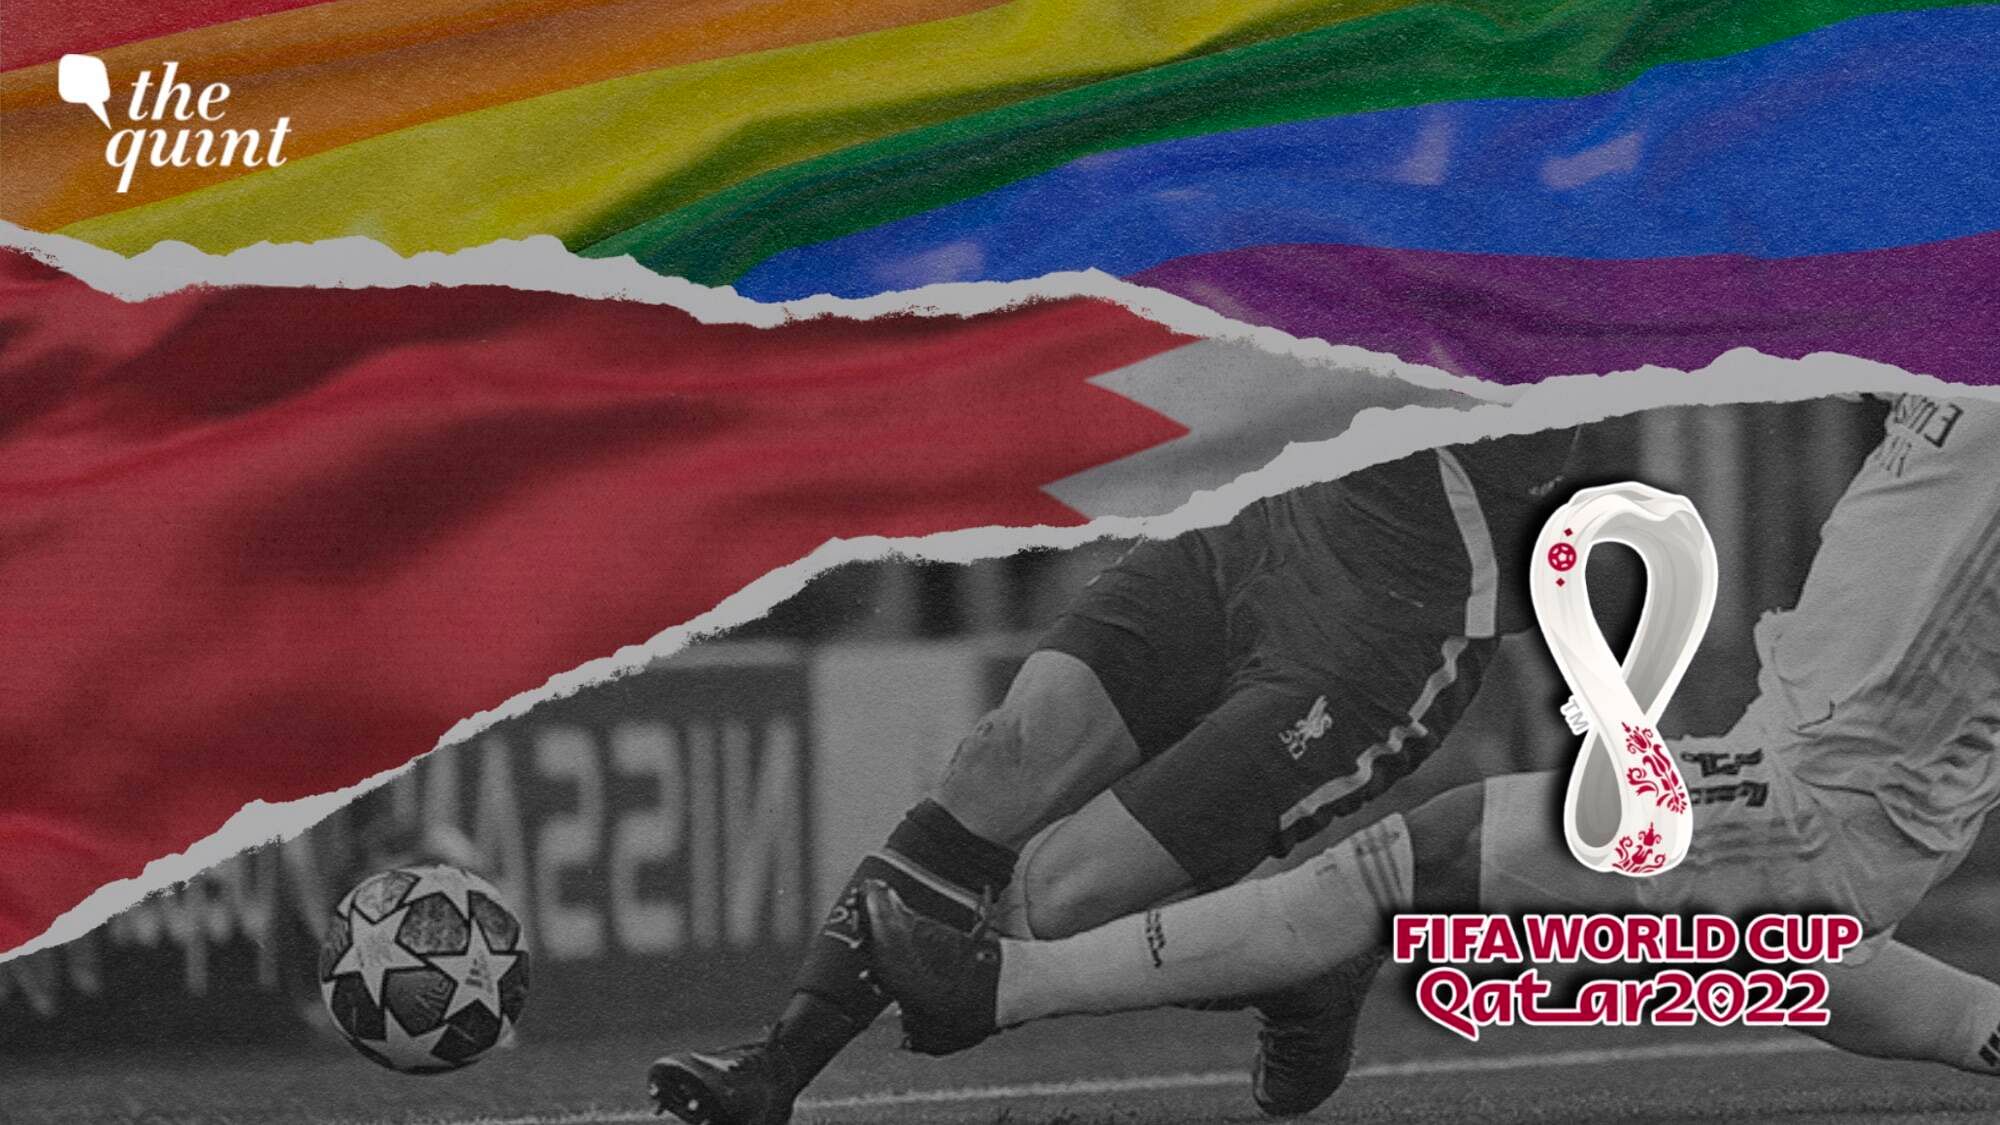 <div class="paragraphs"><p>Ahead of <a href="https://www.thequint.com/topic/2022-fifa-world-cup">FIFA World Cup 2022</a>, which is slated to begin in 20 November, football fans from the LGBTQI+ community are concerned for their safety in the Arab country, where homosexuality is strictly illegal.</p></div>